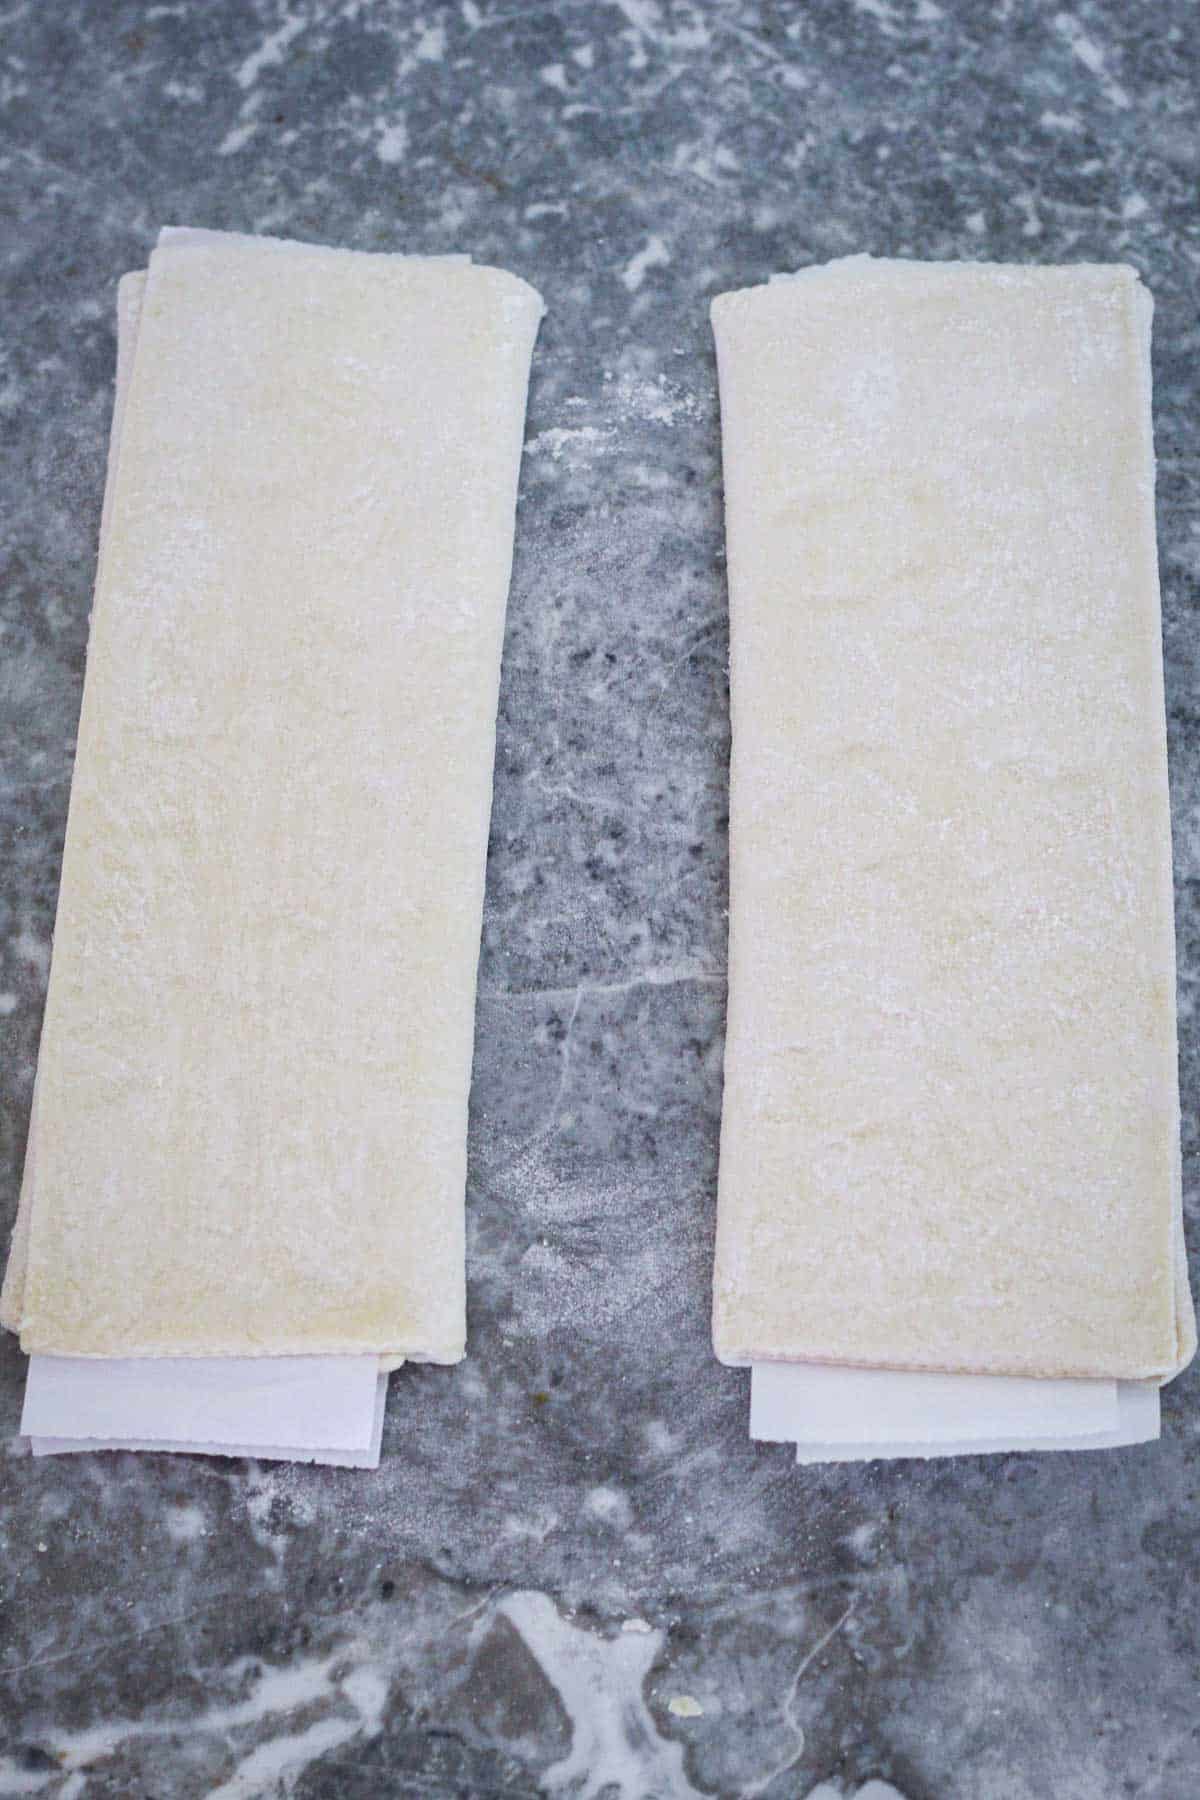 Two packs of puff pastry, unbaked.